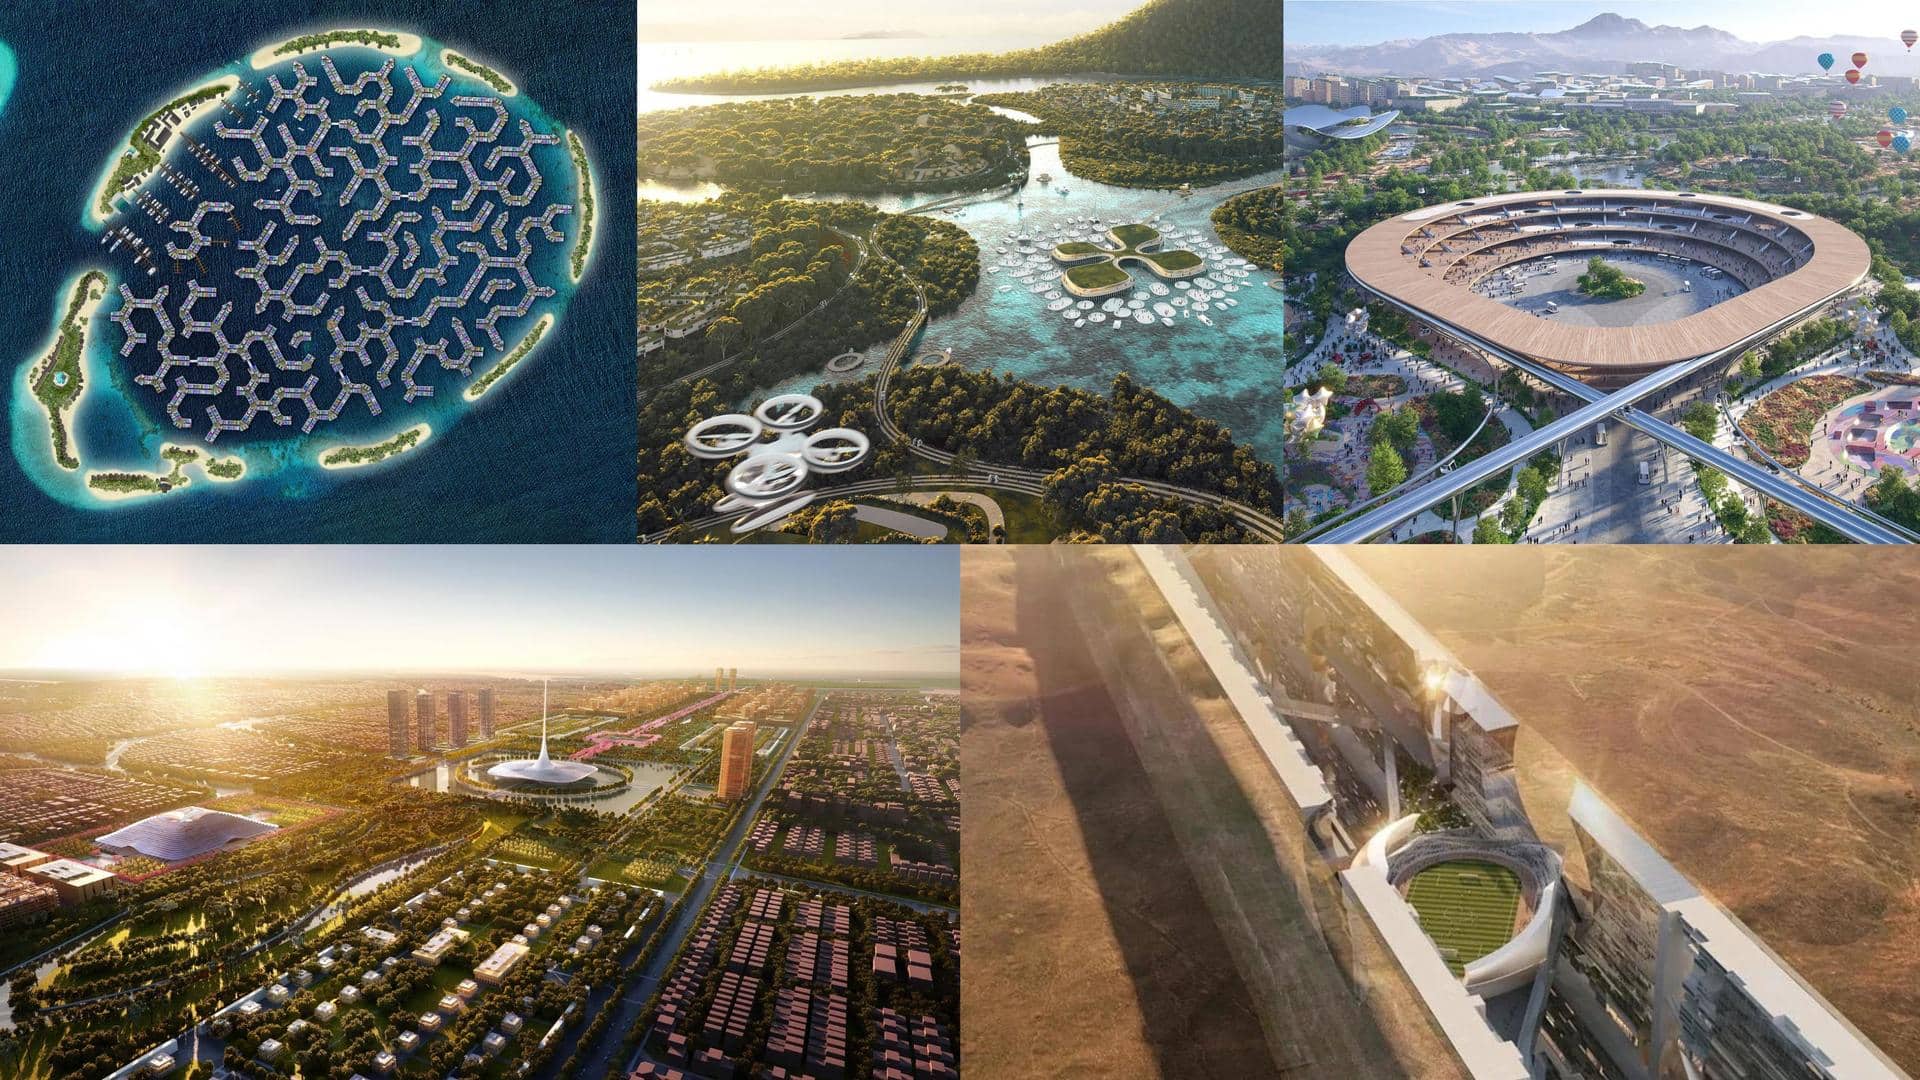 What is so special about these futuristic, ultra-modern cities